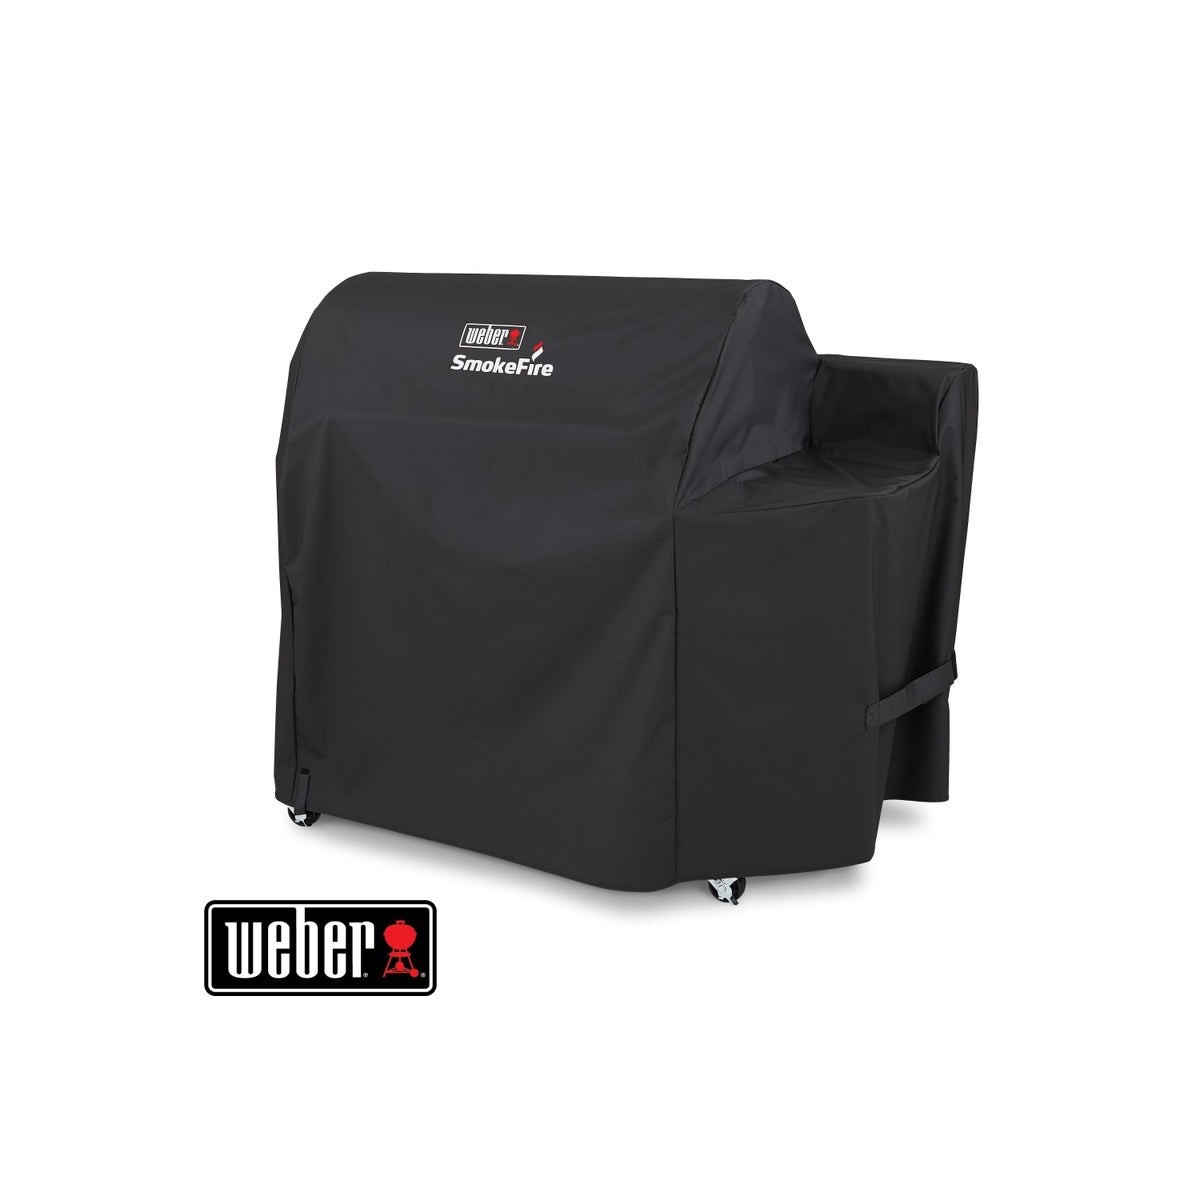 WEBER Grill Cover Smoke Fire EX6 grills, 7193